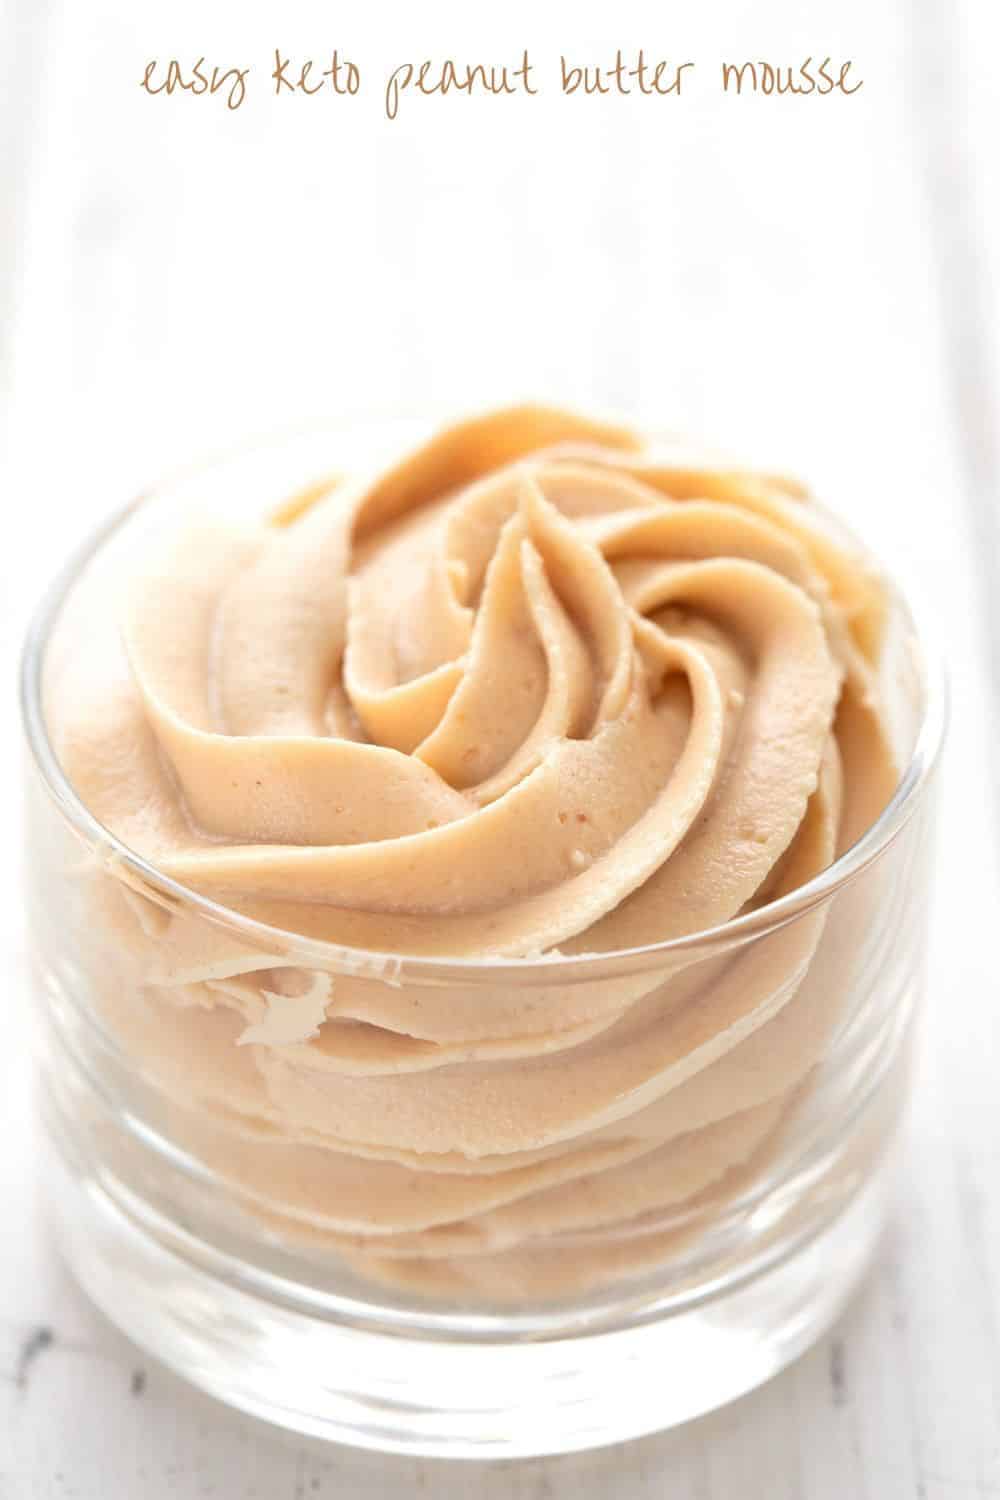 6 Ways to Use Powdered Peanut Butter